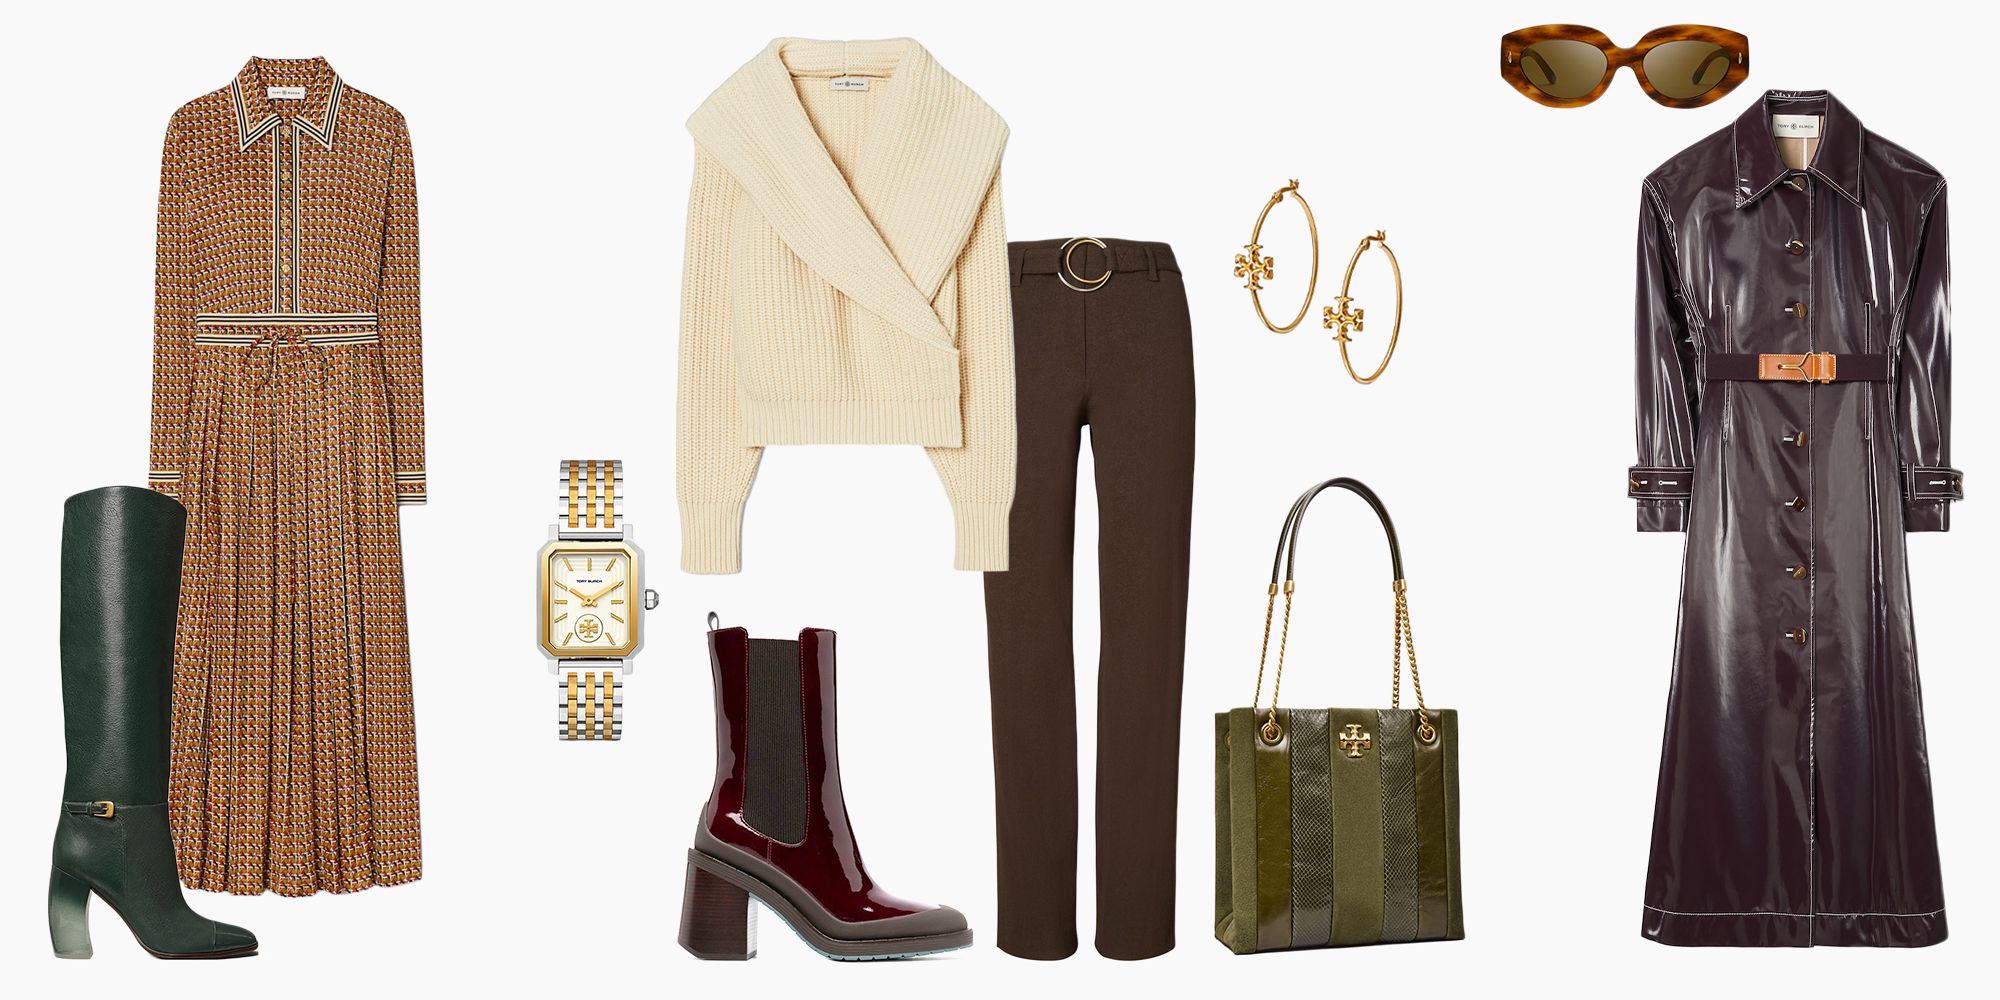 Save Up to 30% On Our Tory Burch Favorites During the Annual Fall Event Sale